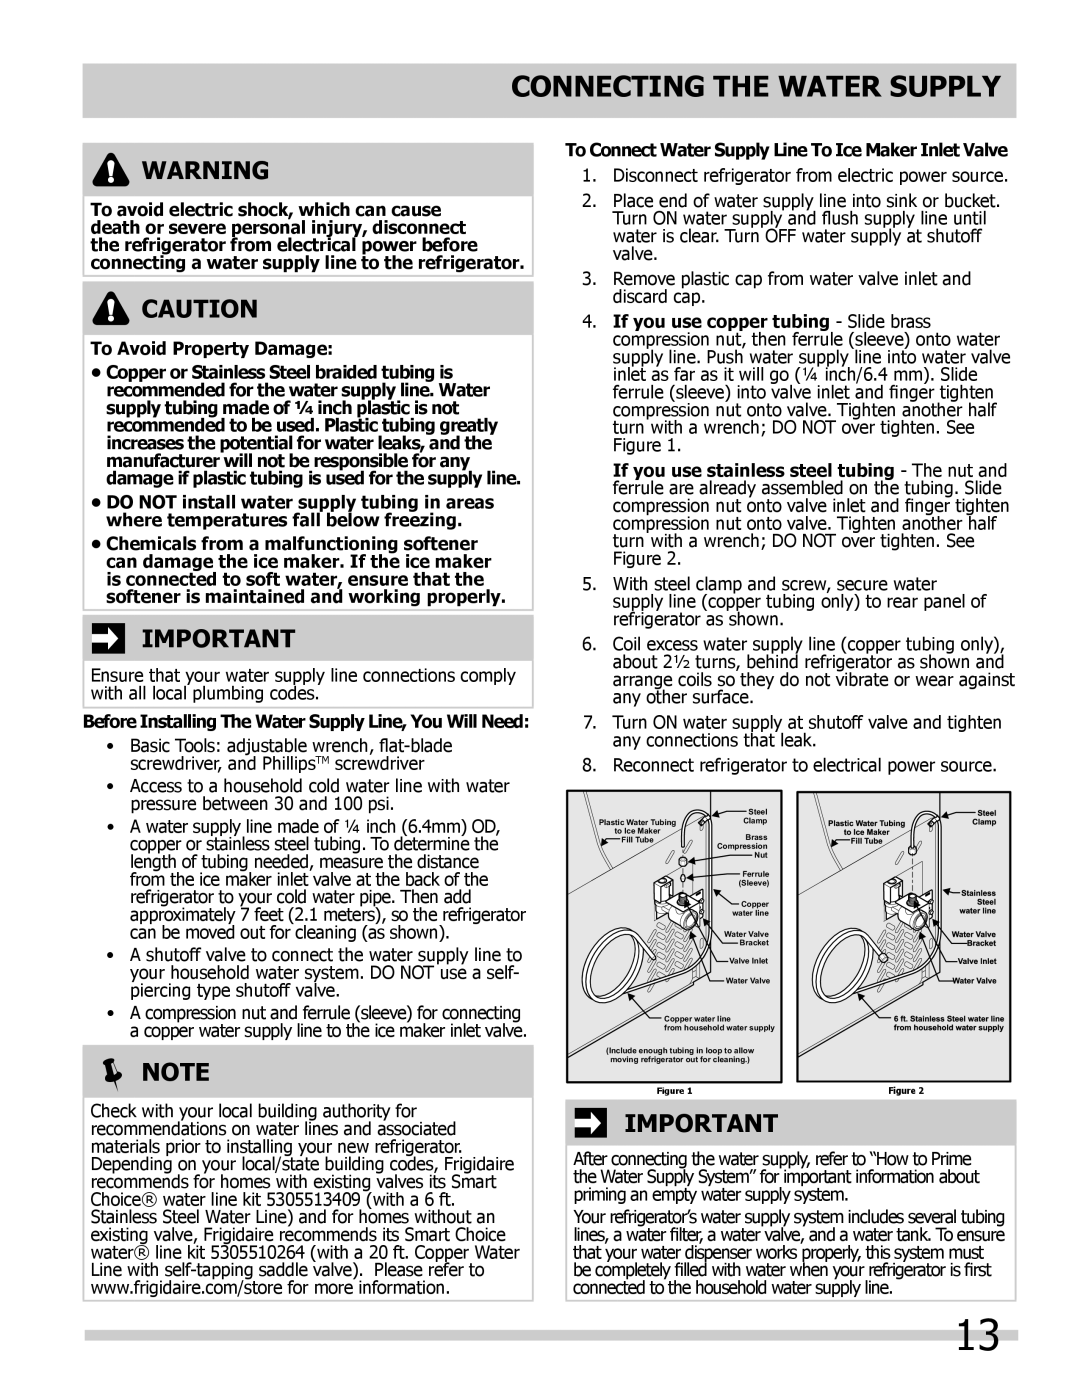 Frigidaire FGHB2844LF5 manual Connecting the Water Supply, To Avoid Property Damage, Note 